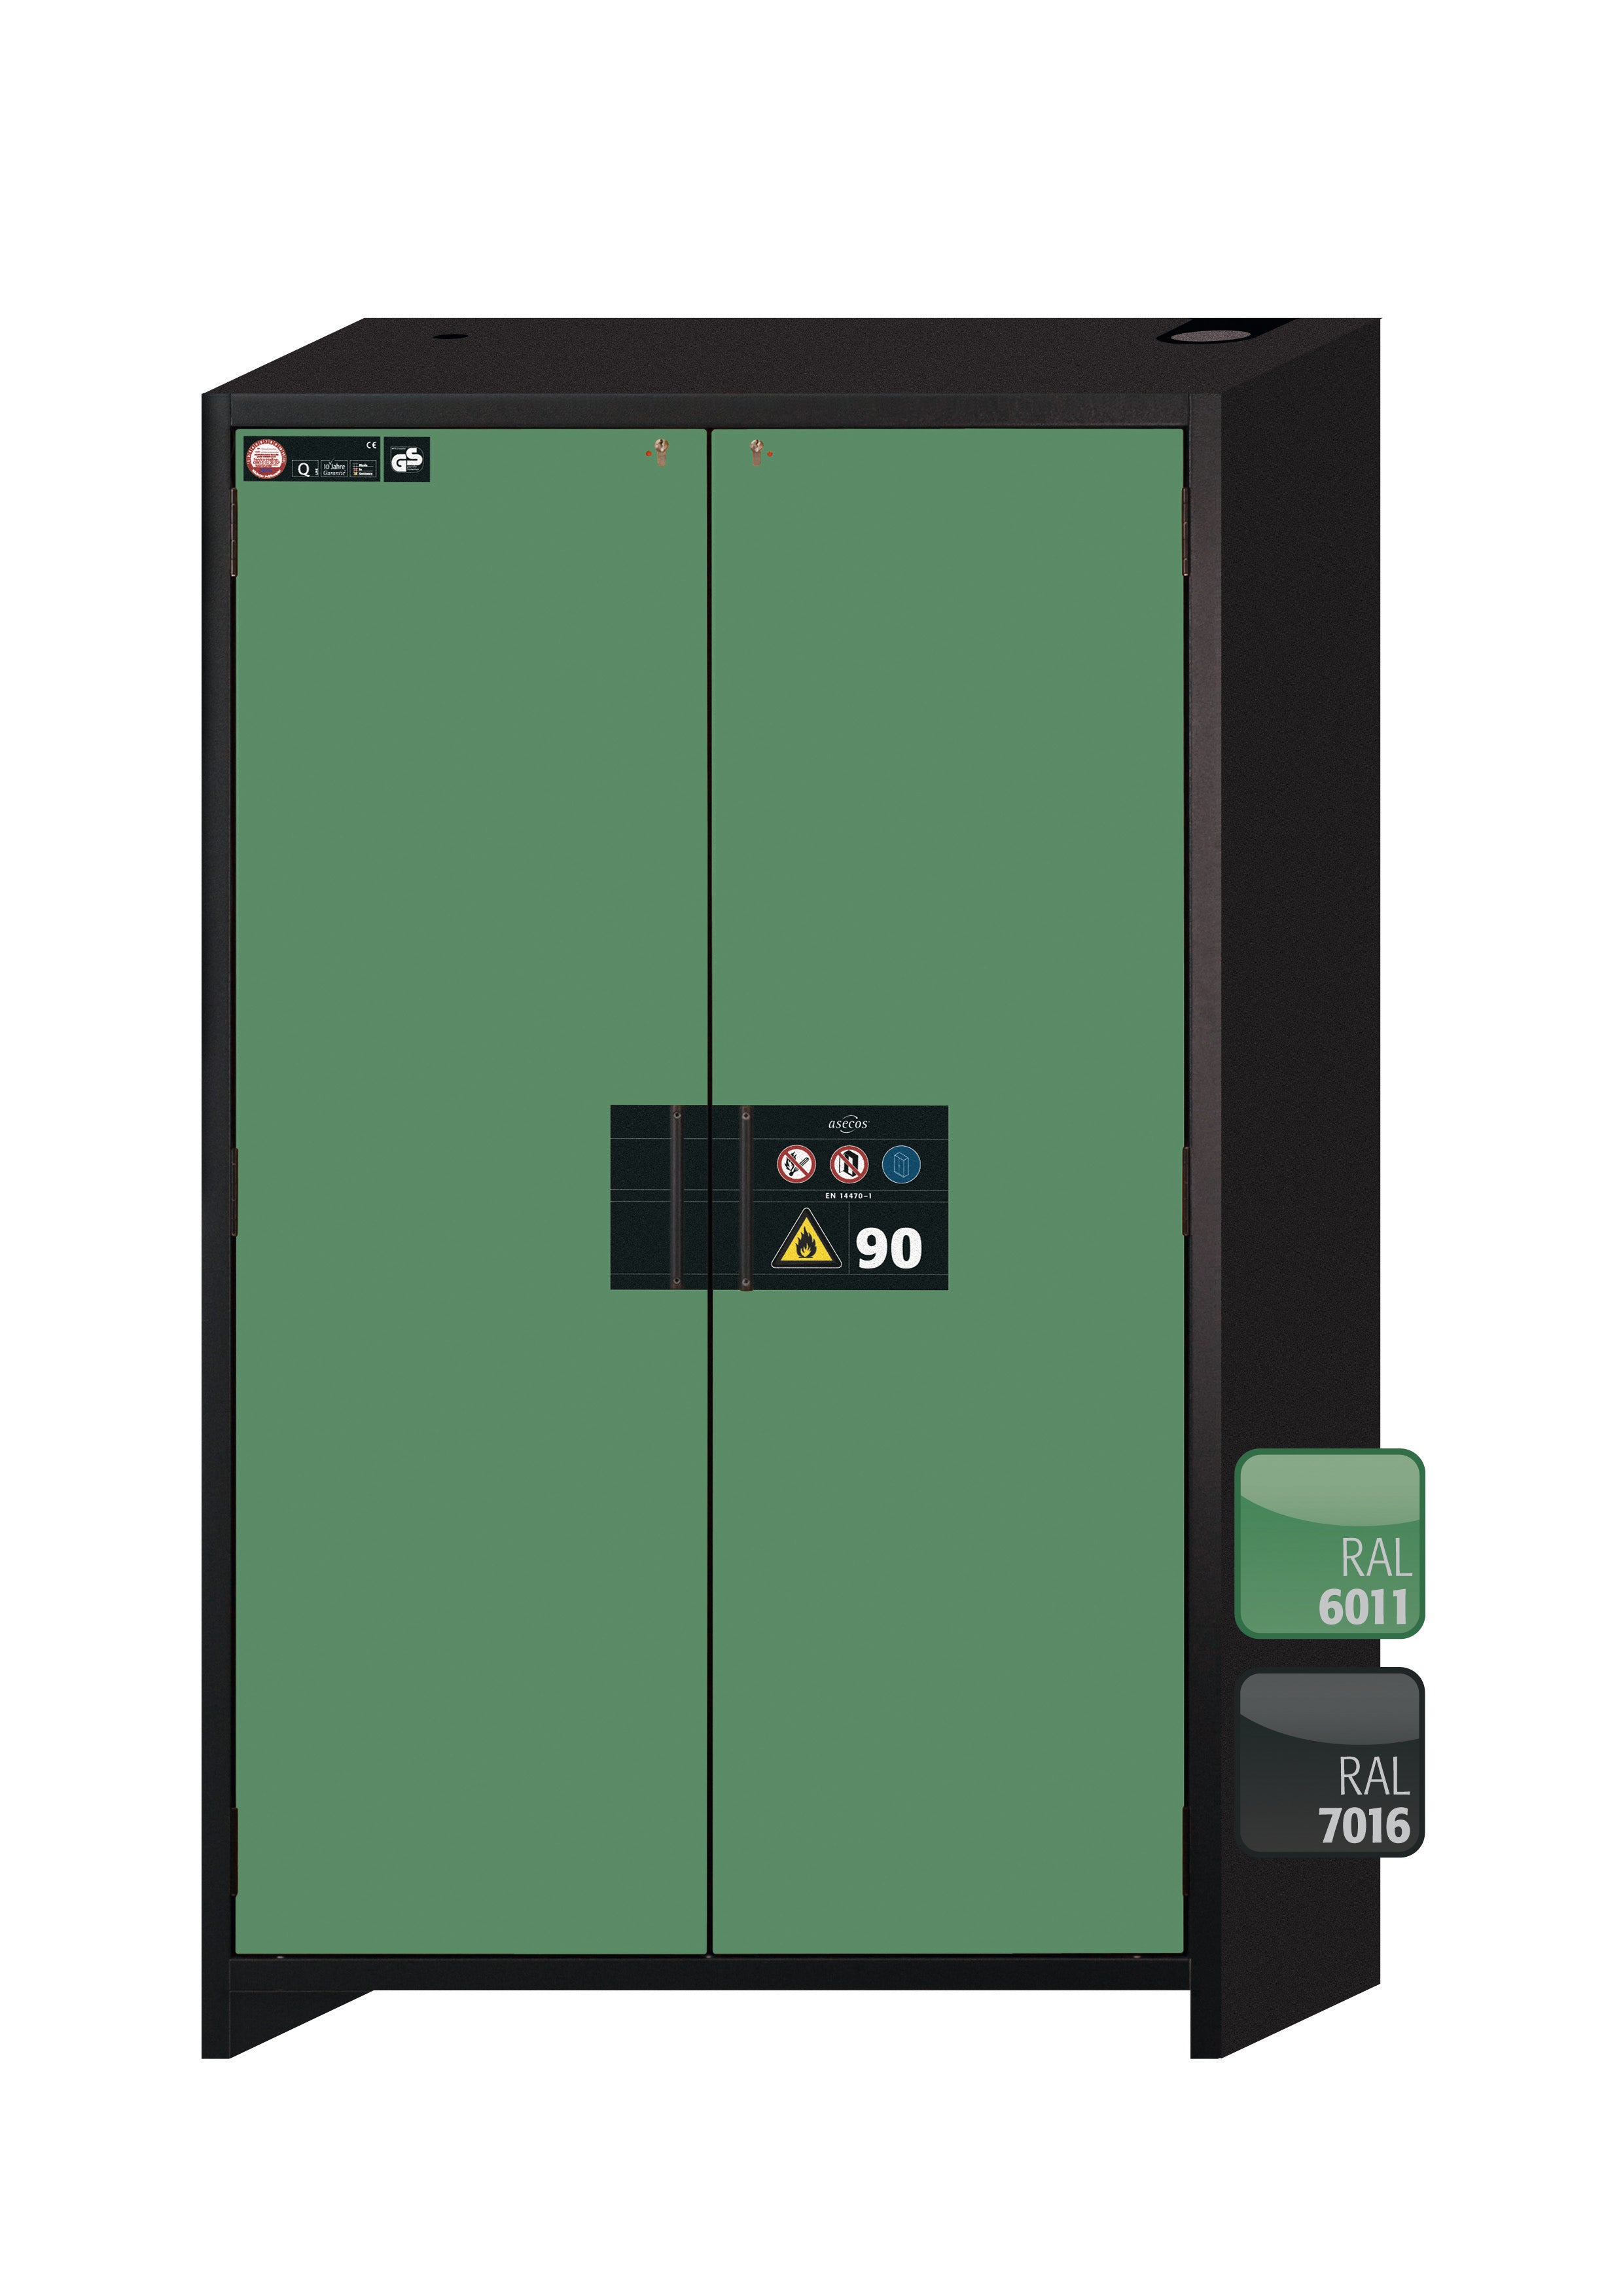 Type 90 safety storage cabinet Q-CLASSIC-90 model Q90.195.120 in reseda green RAL 6011 with 2x tray shelf (standard) (polypropylene),